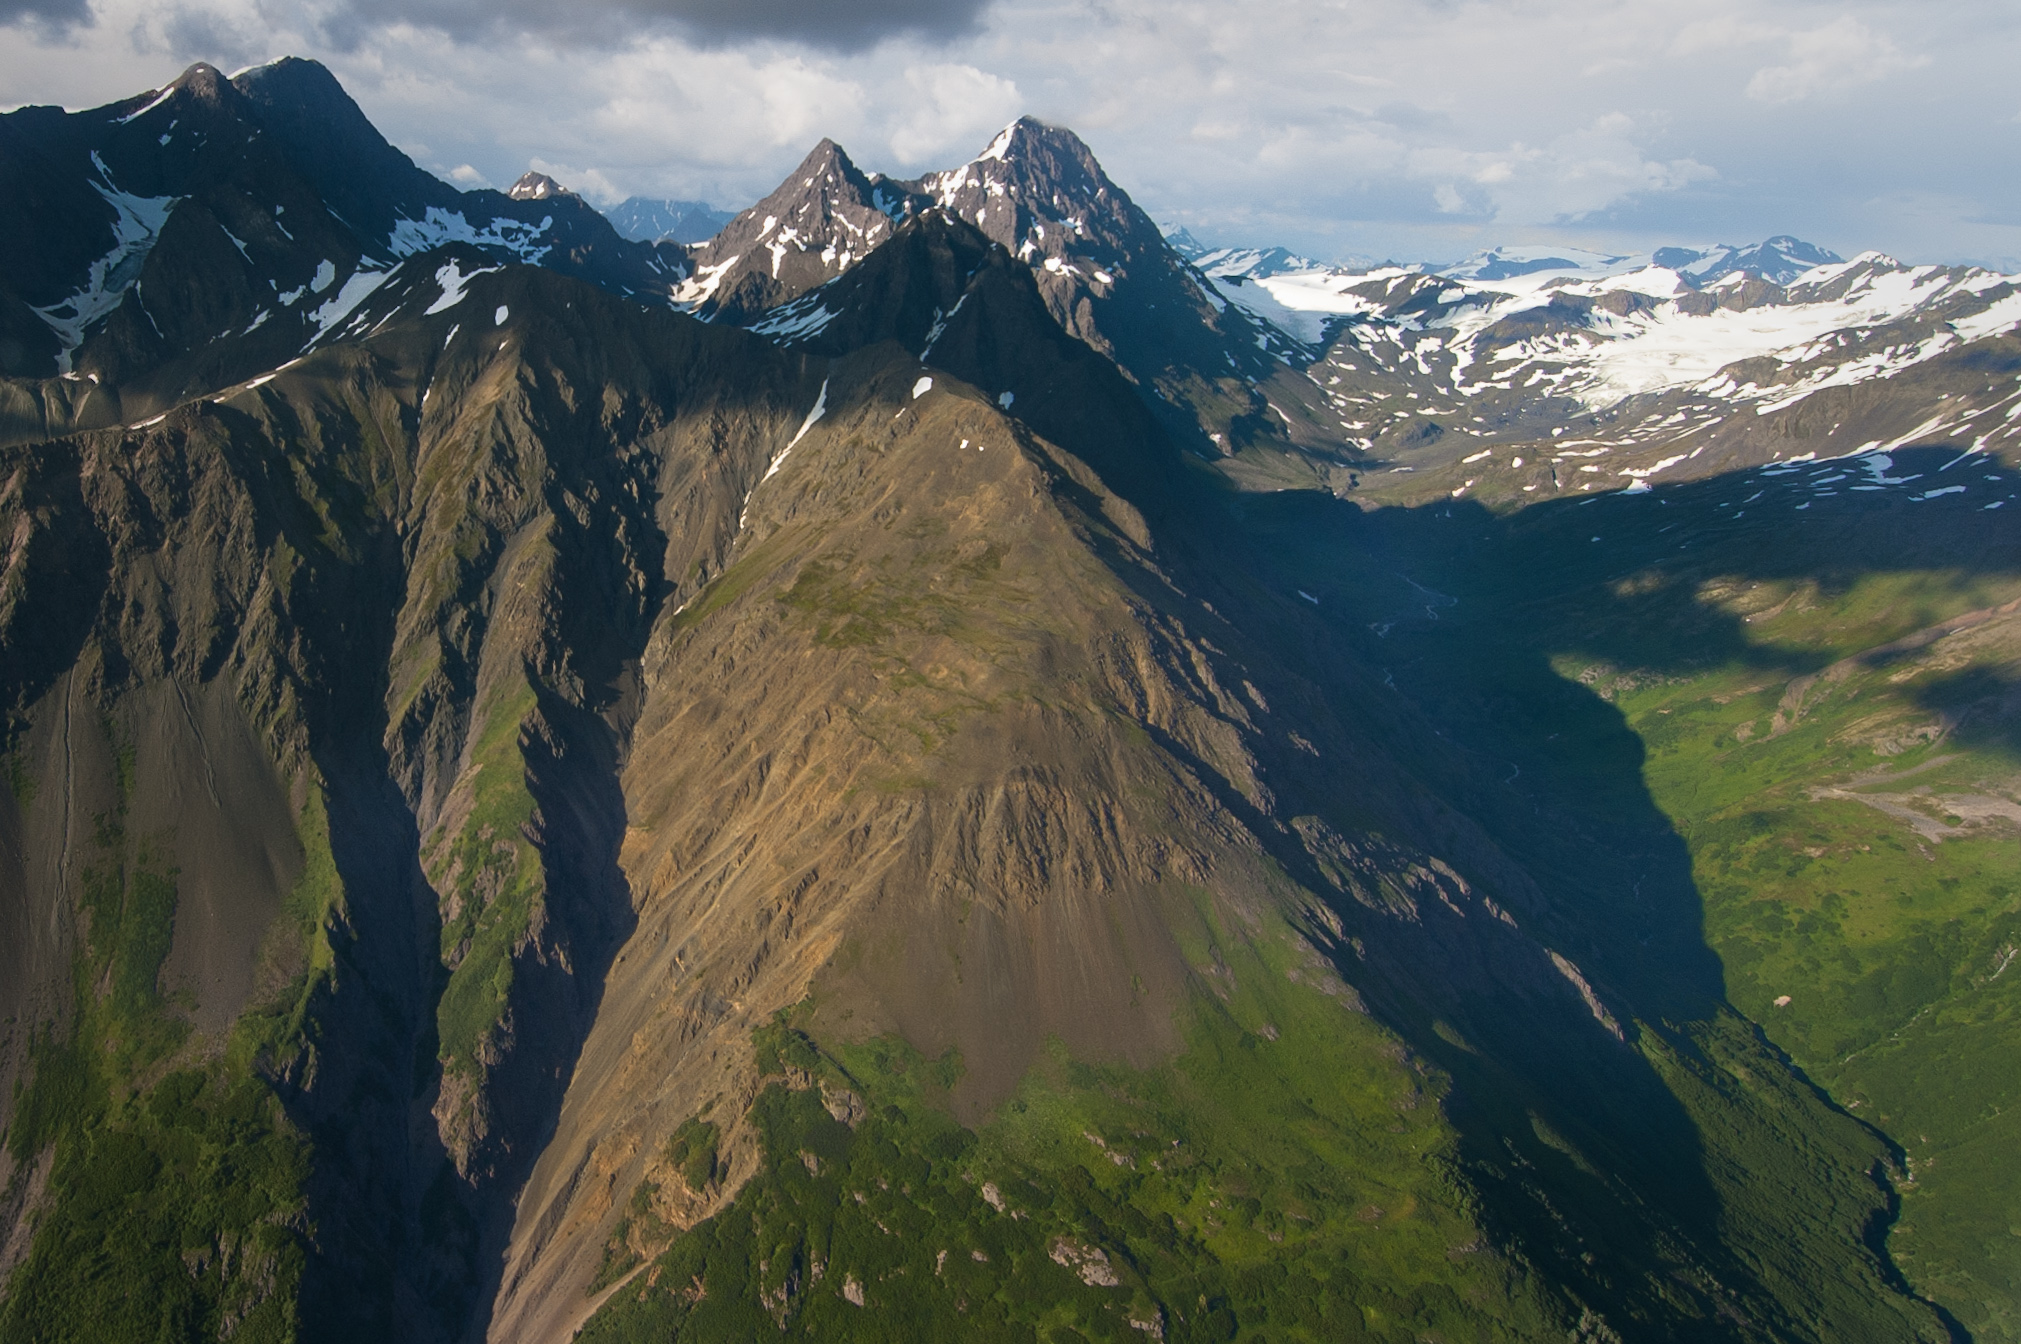 Alaska Mountains | Here Are the Best Ways to See Alaska's Mountains